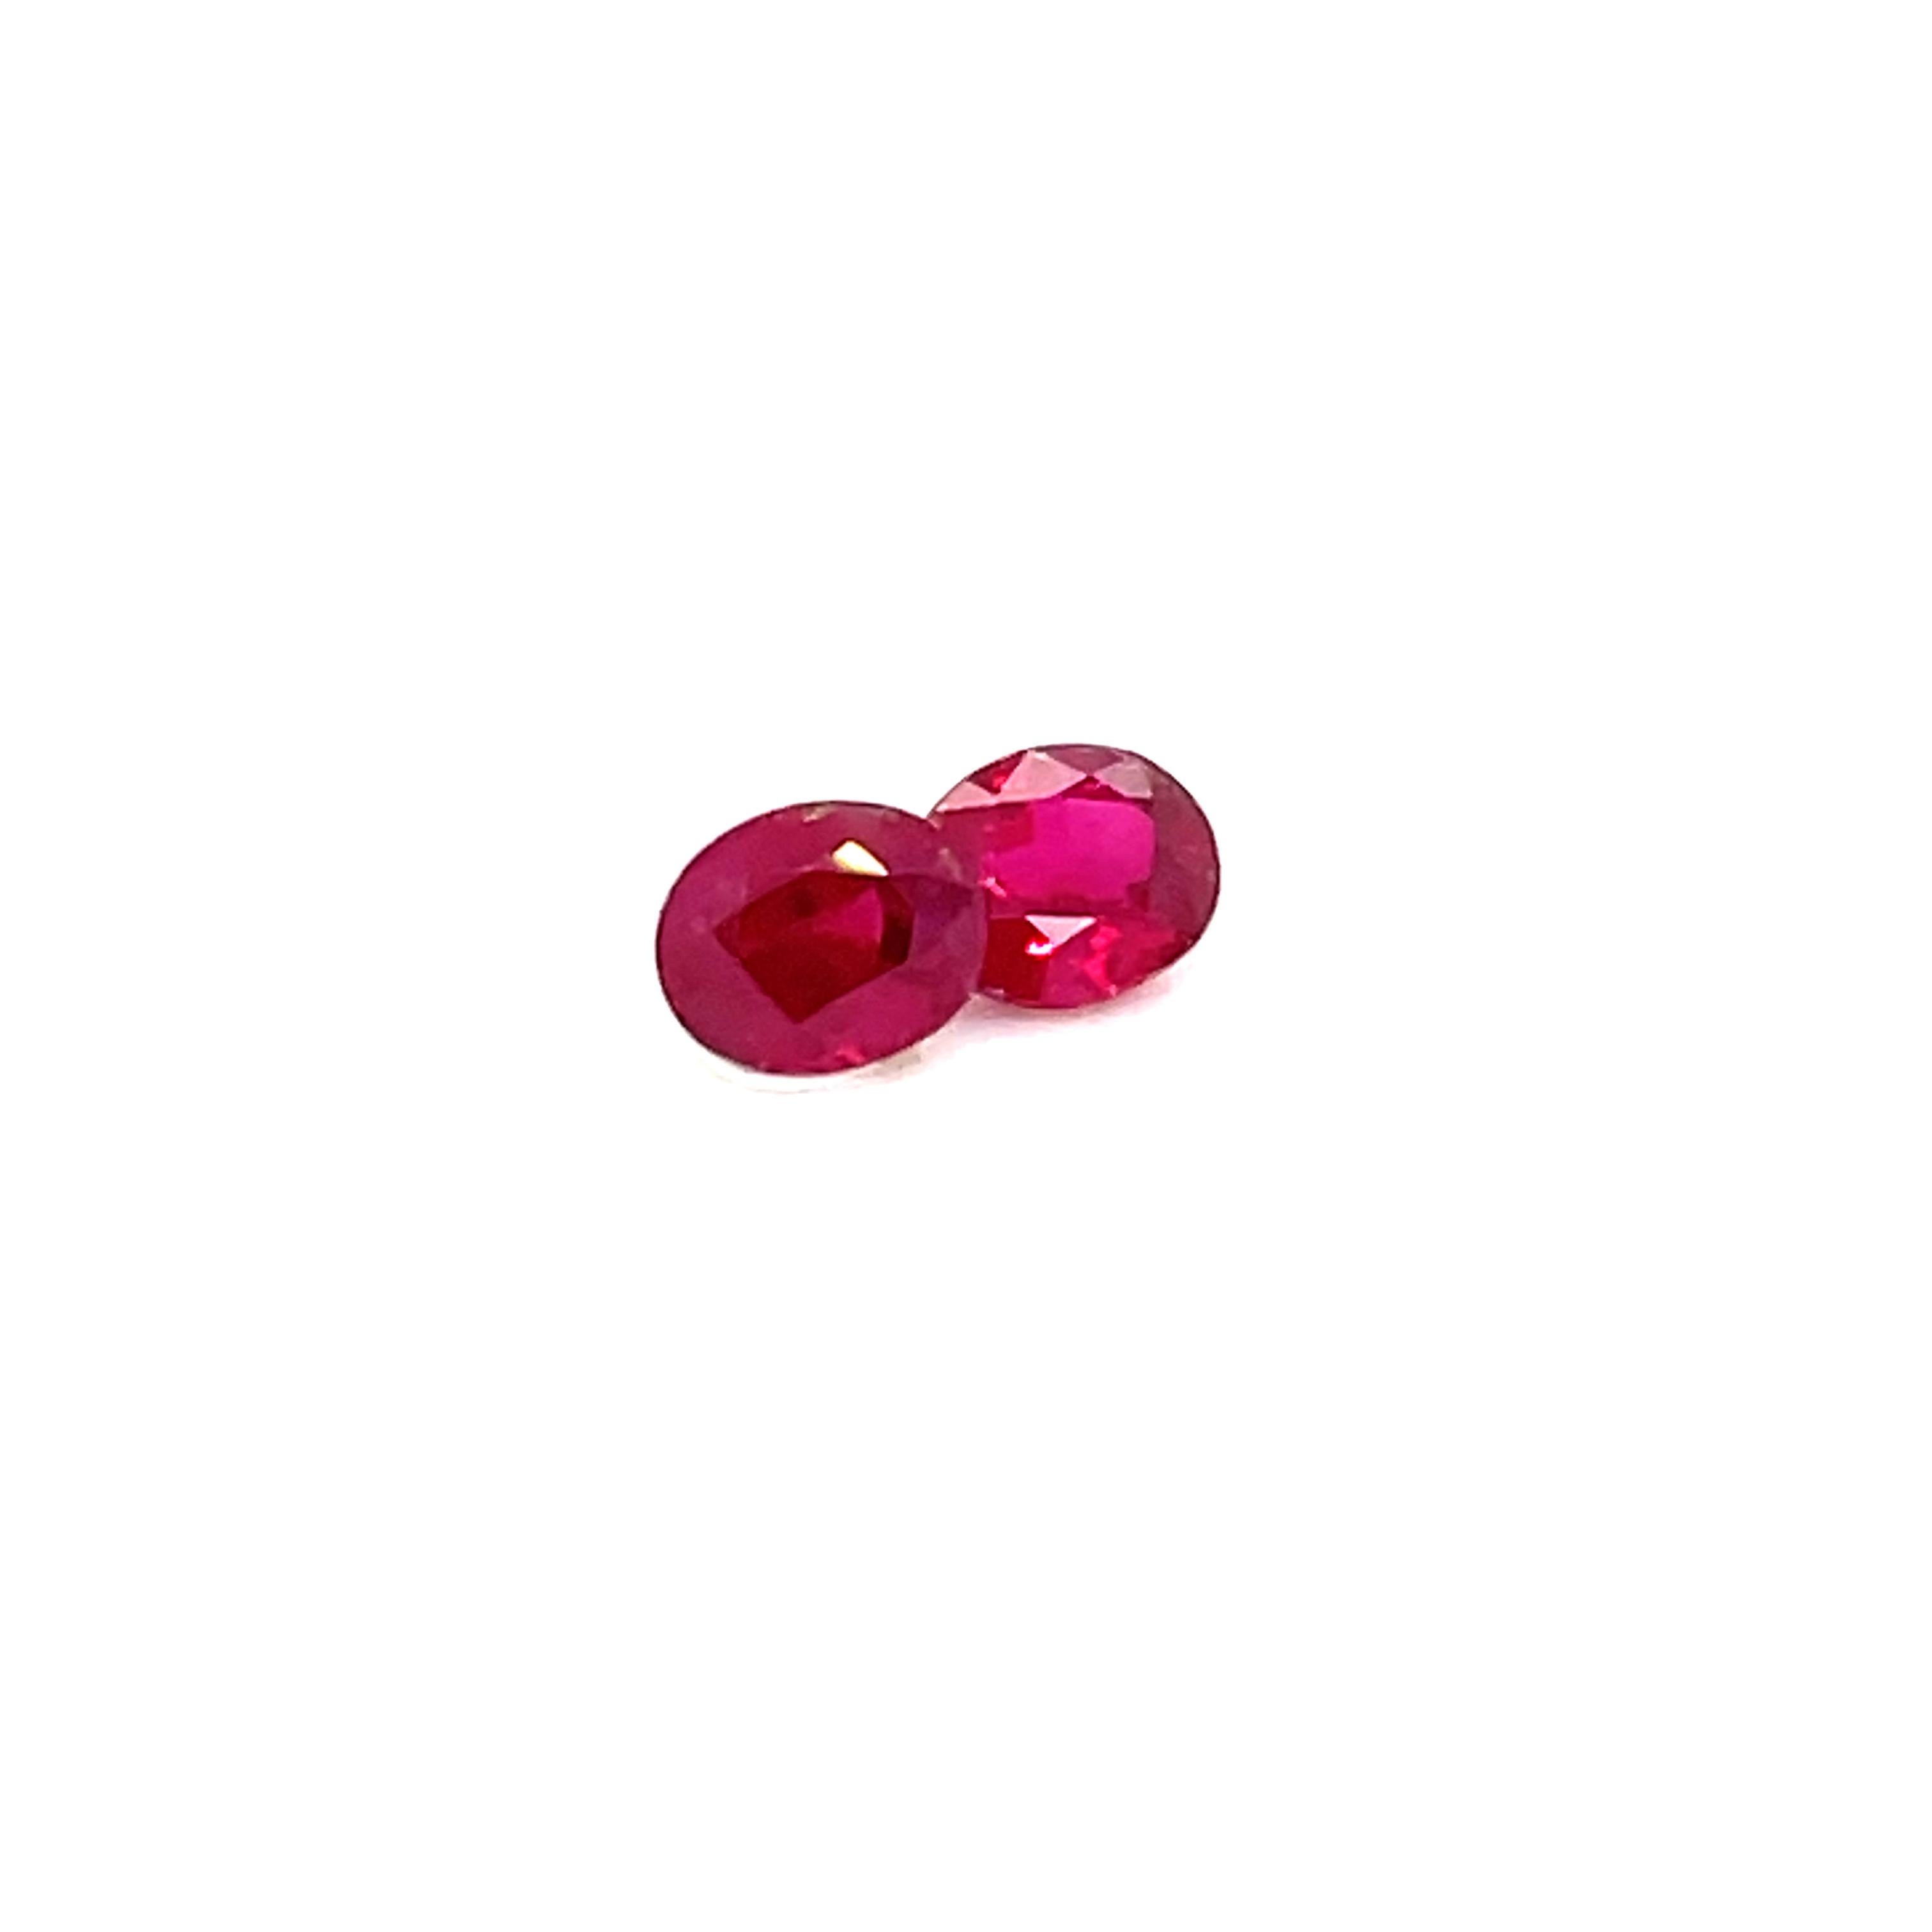 Rarity meets quality, as these gems are a symbol of passion and desire.

These GRS-certified Burmese Pigeon’s Blood Rubies are a mesmerizing duo totaling 2.22 carats. 

One is a 1.00-carat oval gem measuring 5.63 x 6.49 x 3.22 mm, and its partner is